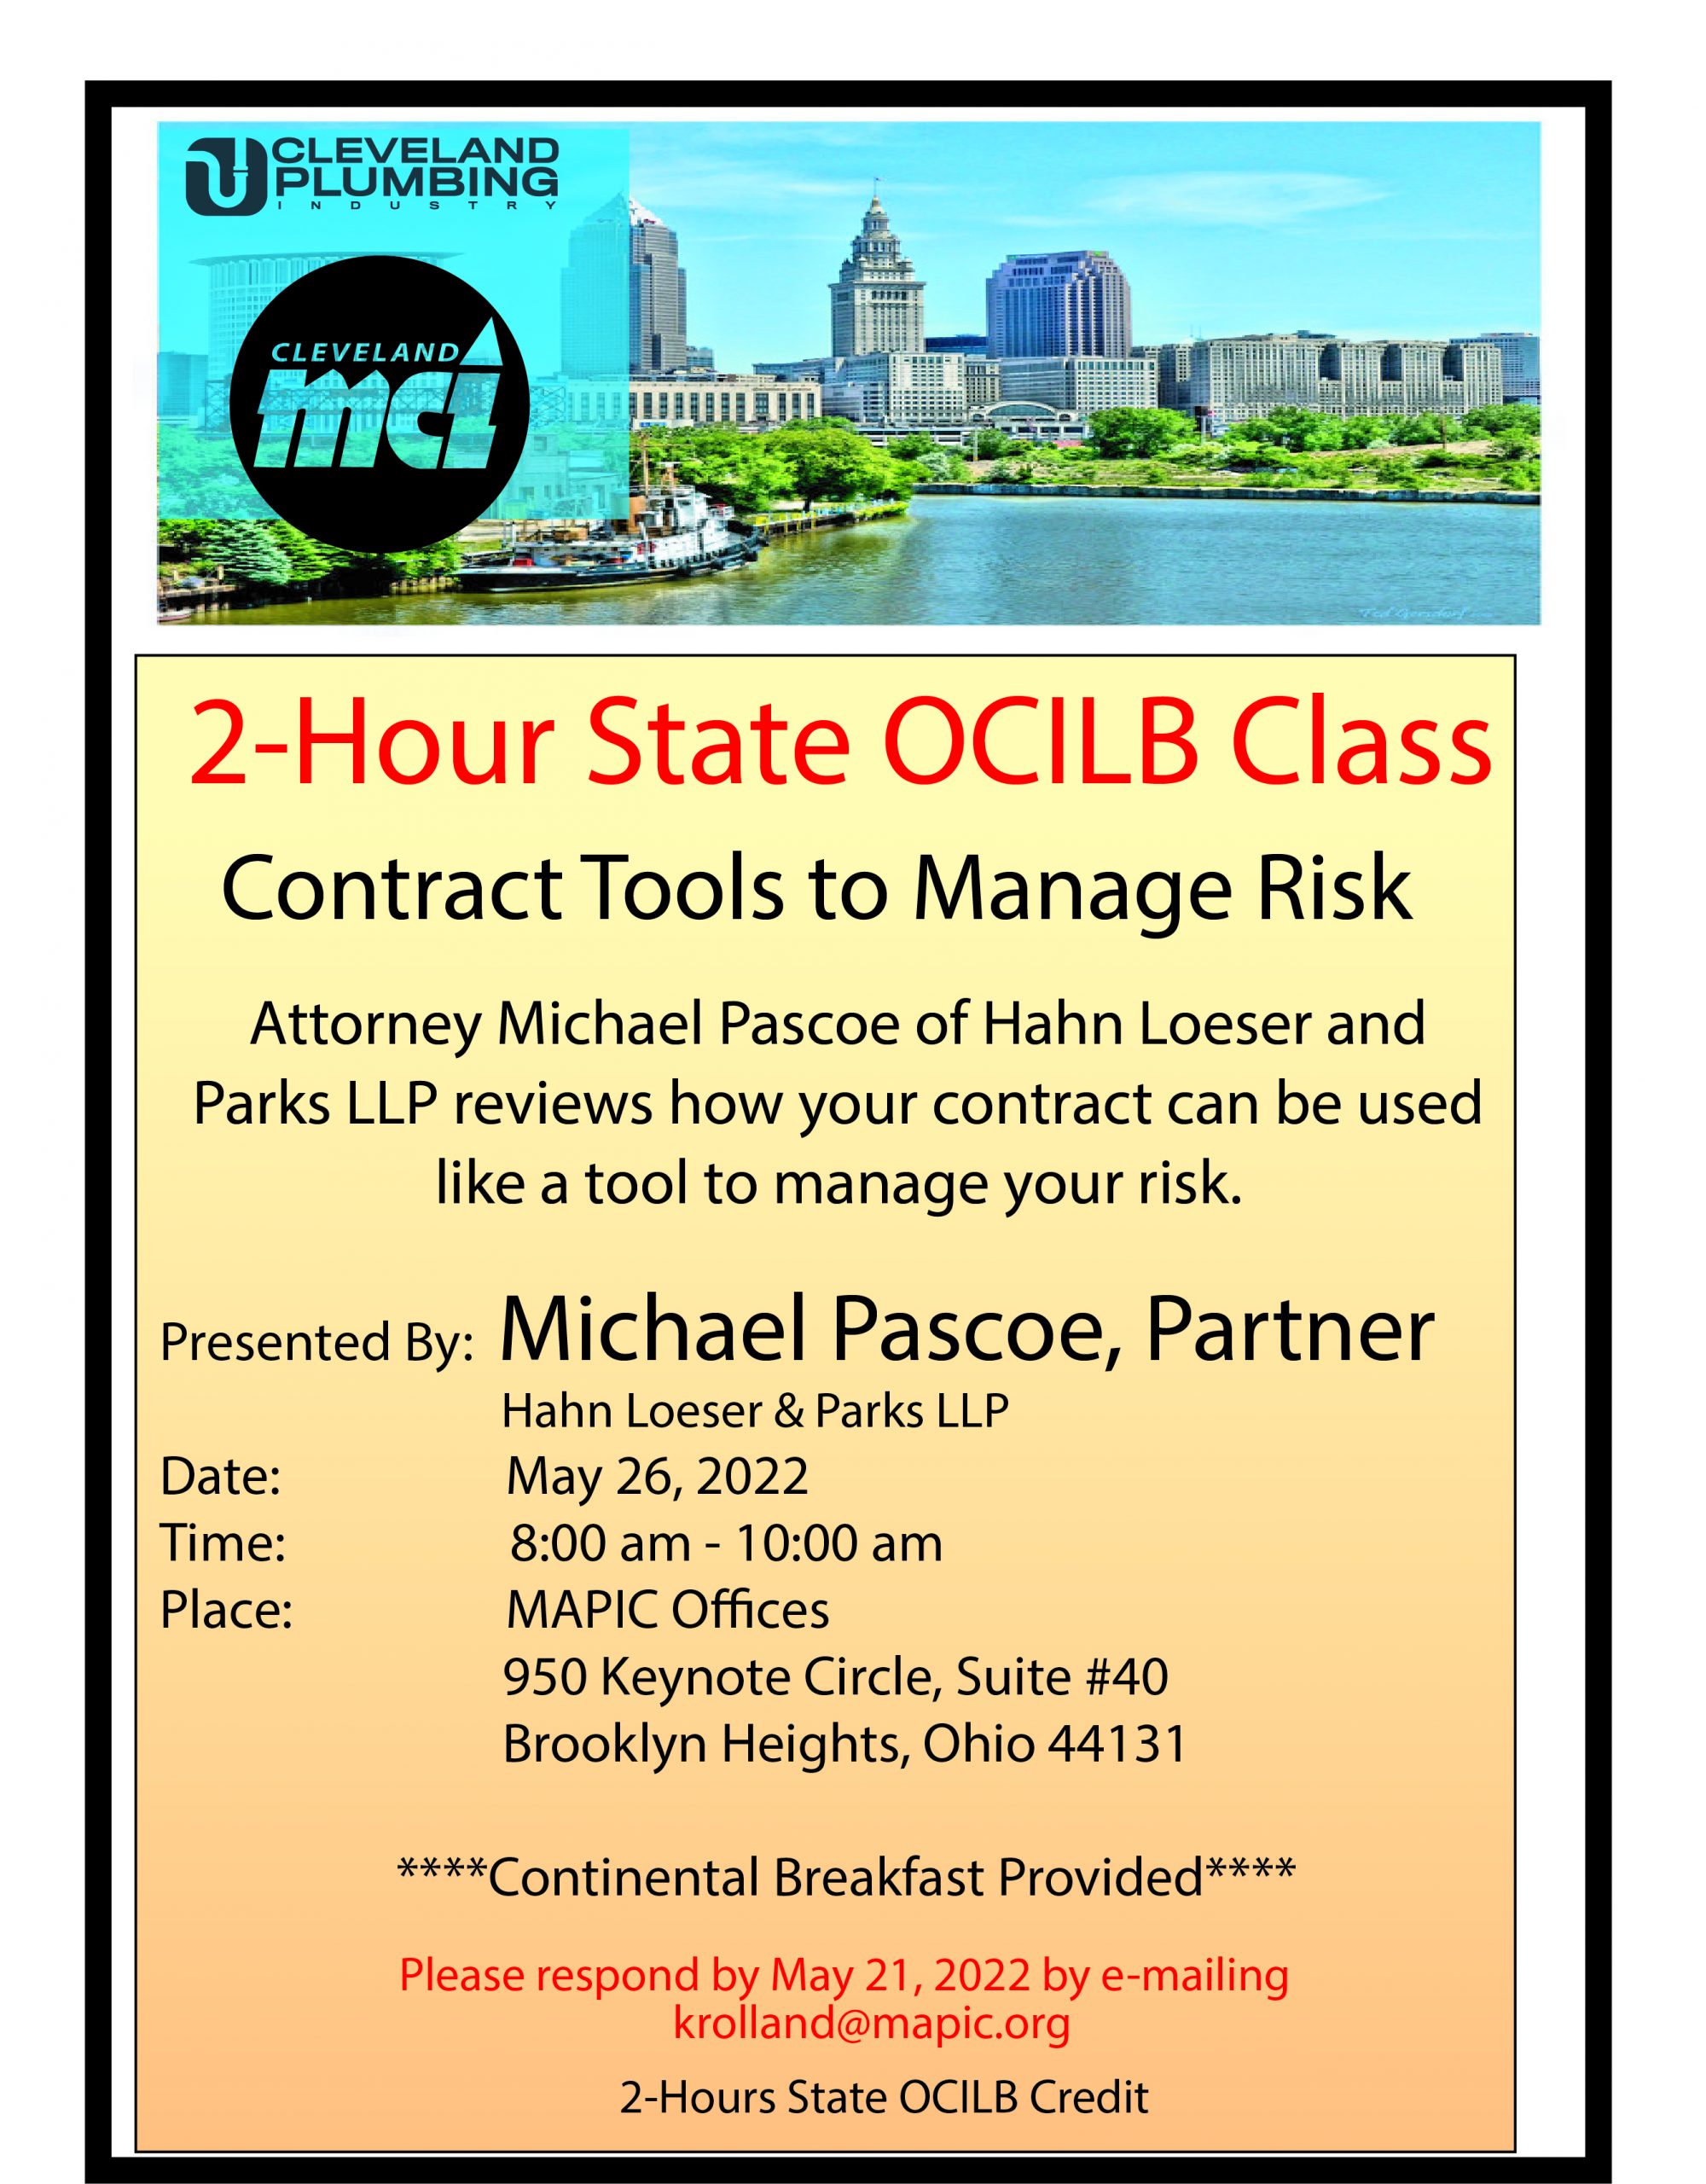 2-Hour State OCILB Class | MAPIC